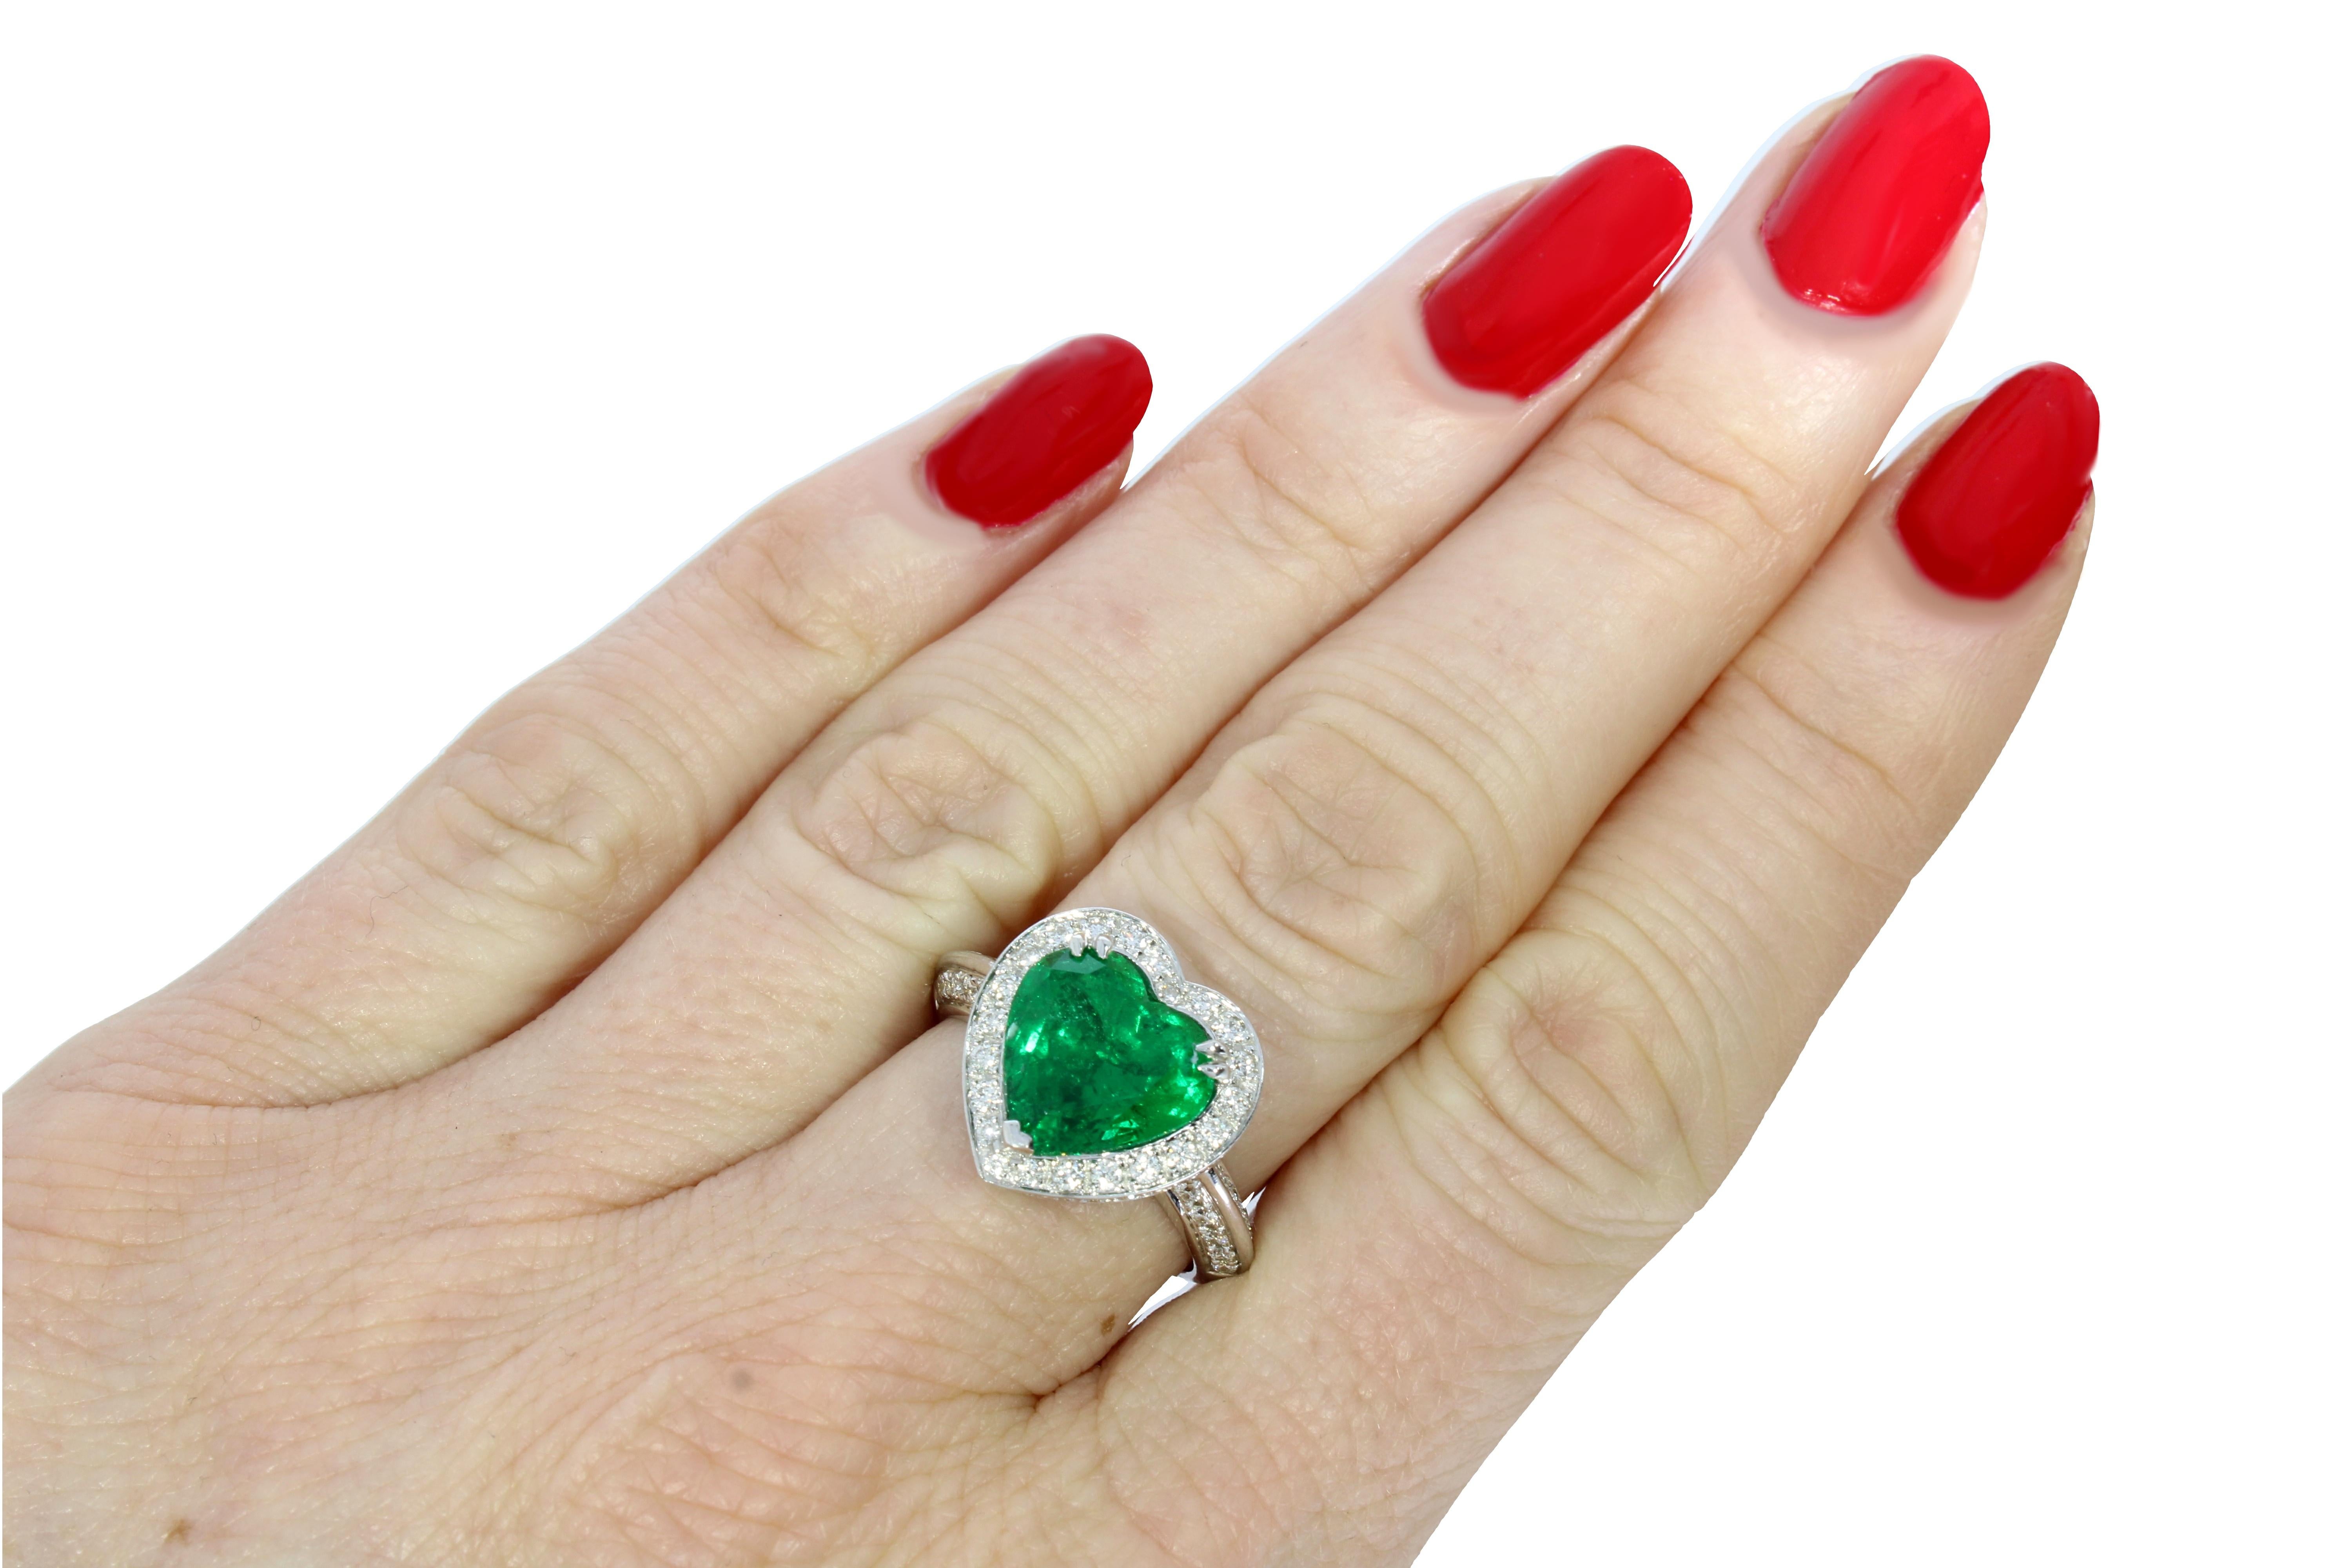 Women's Emerald and Diamond Heart Ring 18 Karat White Gold Collection by Niquesa